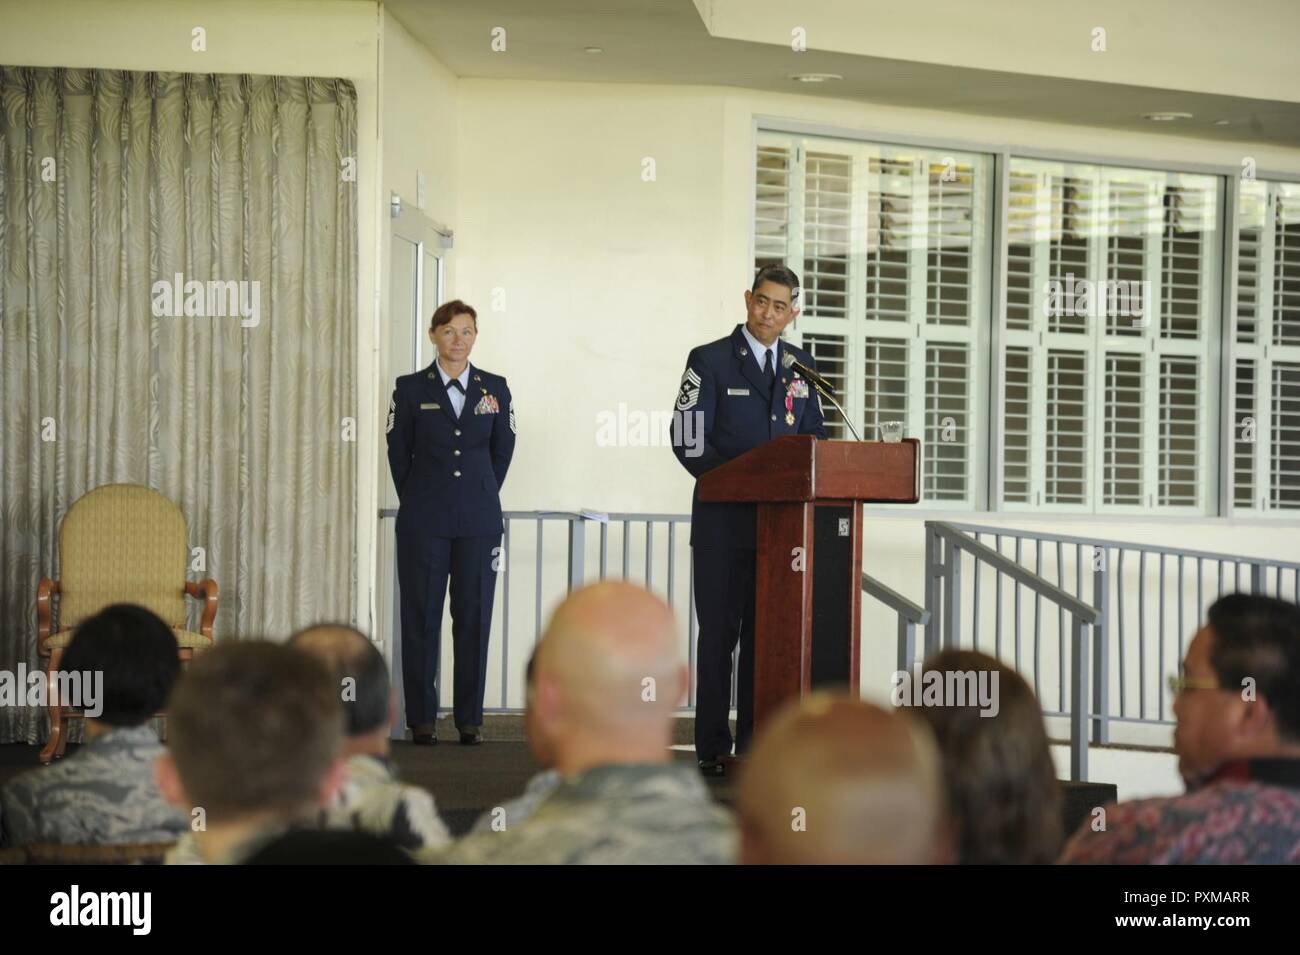 Chief Master Sgt. Brian Wong, Fourth Air Force command chief, speaks to the men and women of Fourth Air Force during his retirement ceremony, Joint Base Pearl Harbor-Hickam, Hawaii, June 12, 2017.  As the command chief, Wong was responsible for advising the commander on the health, welfare, morale, and discipline for all enlisted personnel within Fourth Air Force.  Wong retired after 35 years of service. Stock Photo